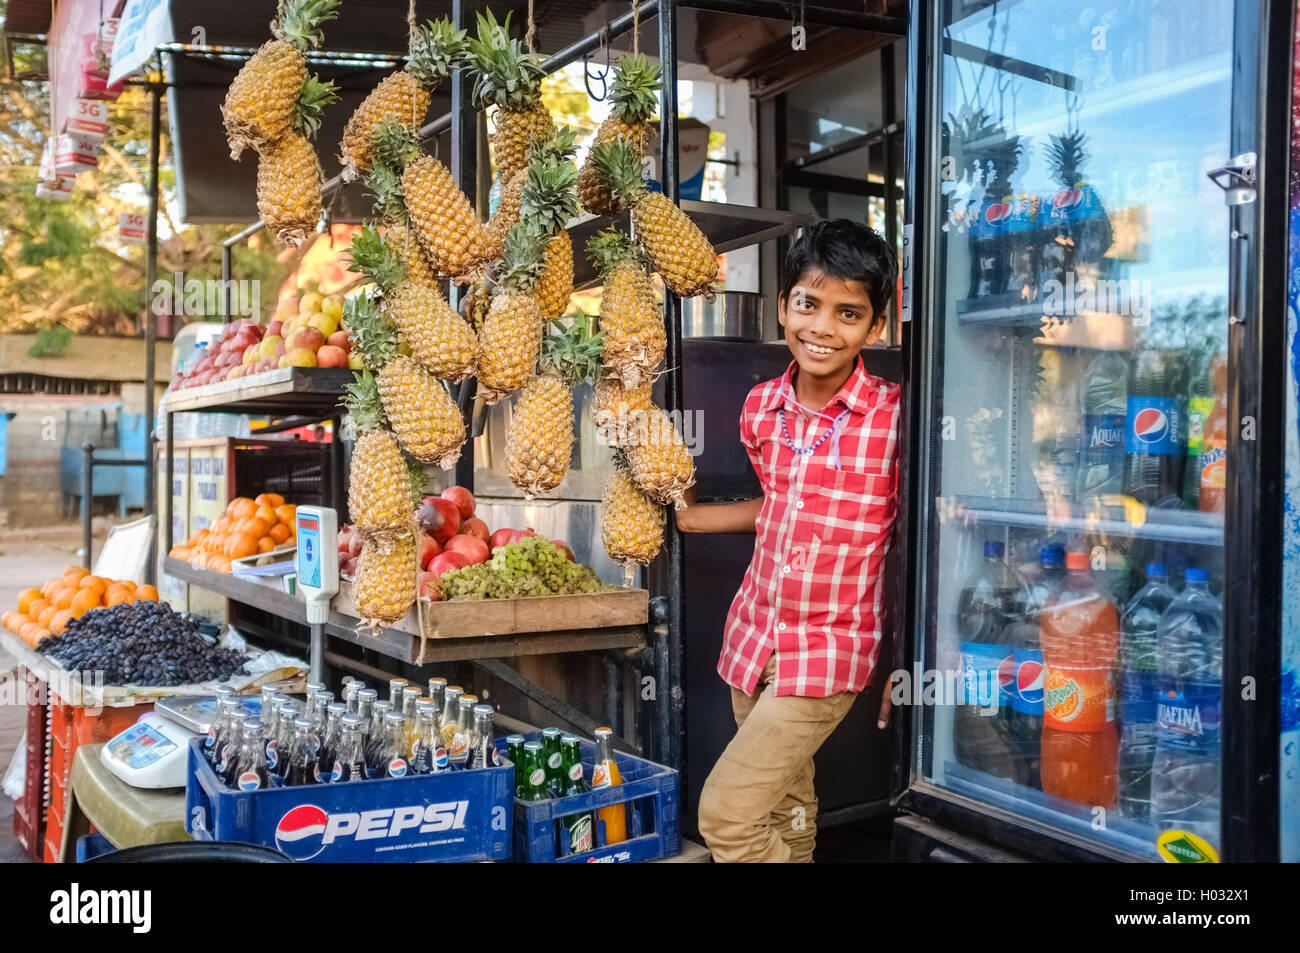 HOSPET, INDIA - 04 FEBRUARY 2015: Indian boy waiting with pineapples in front of store. Stock Photo